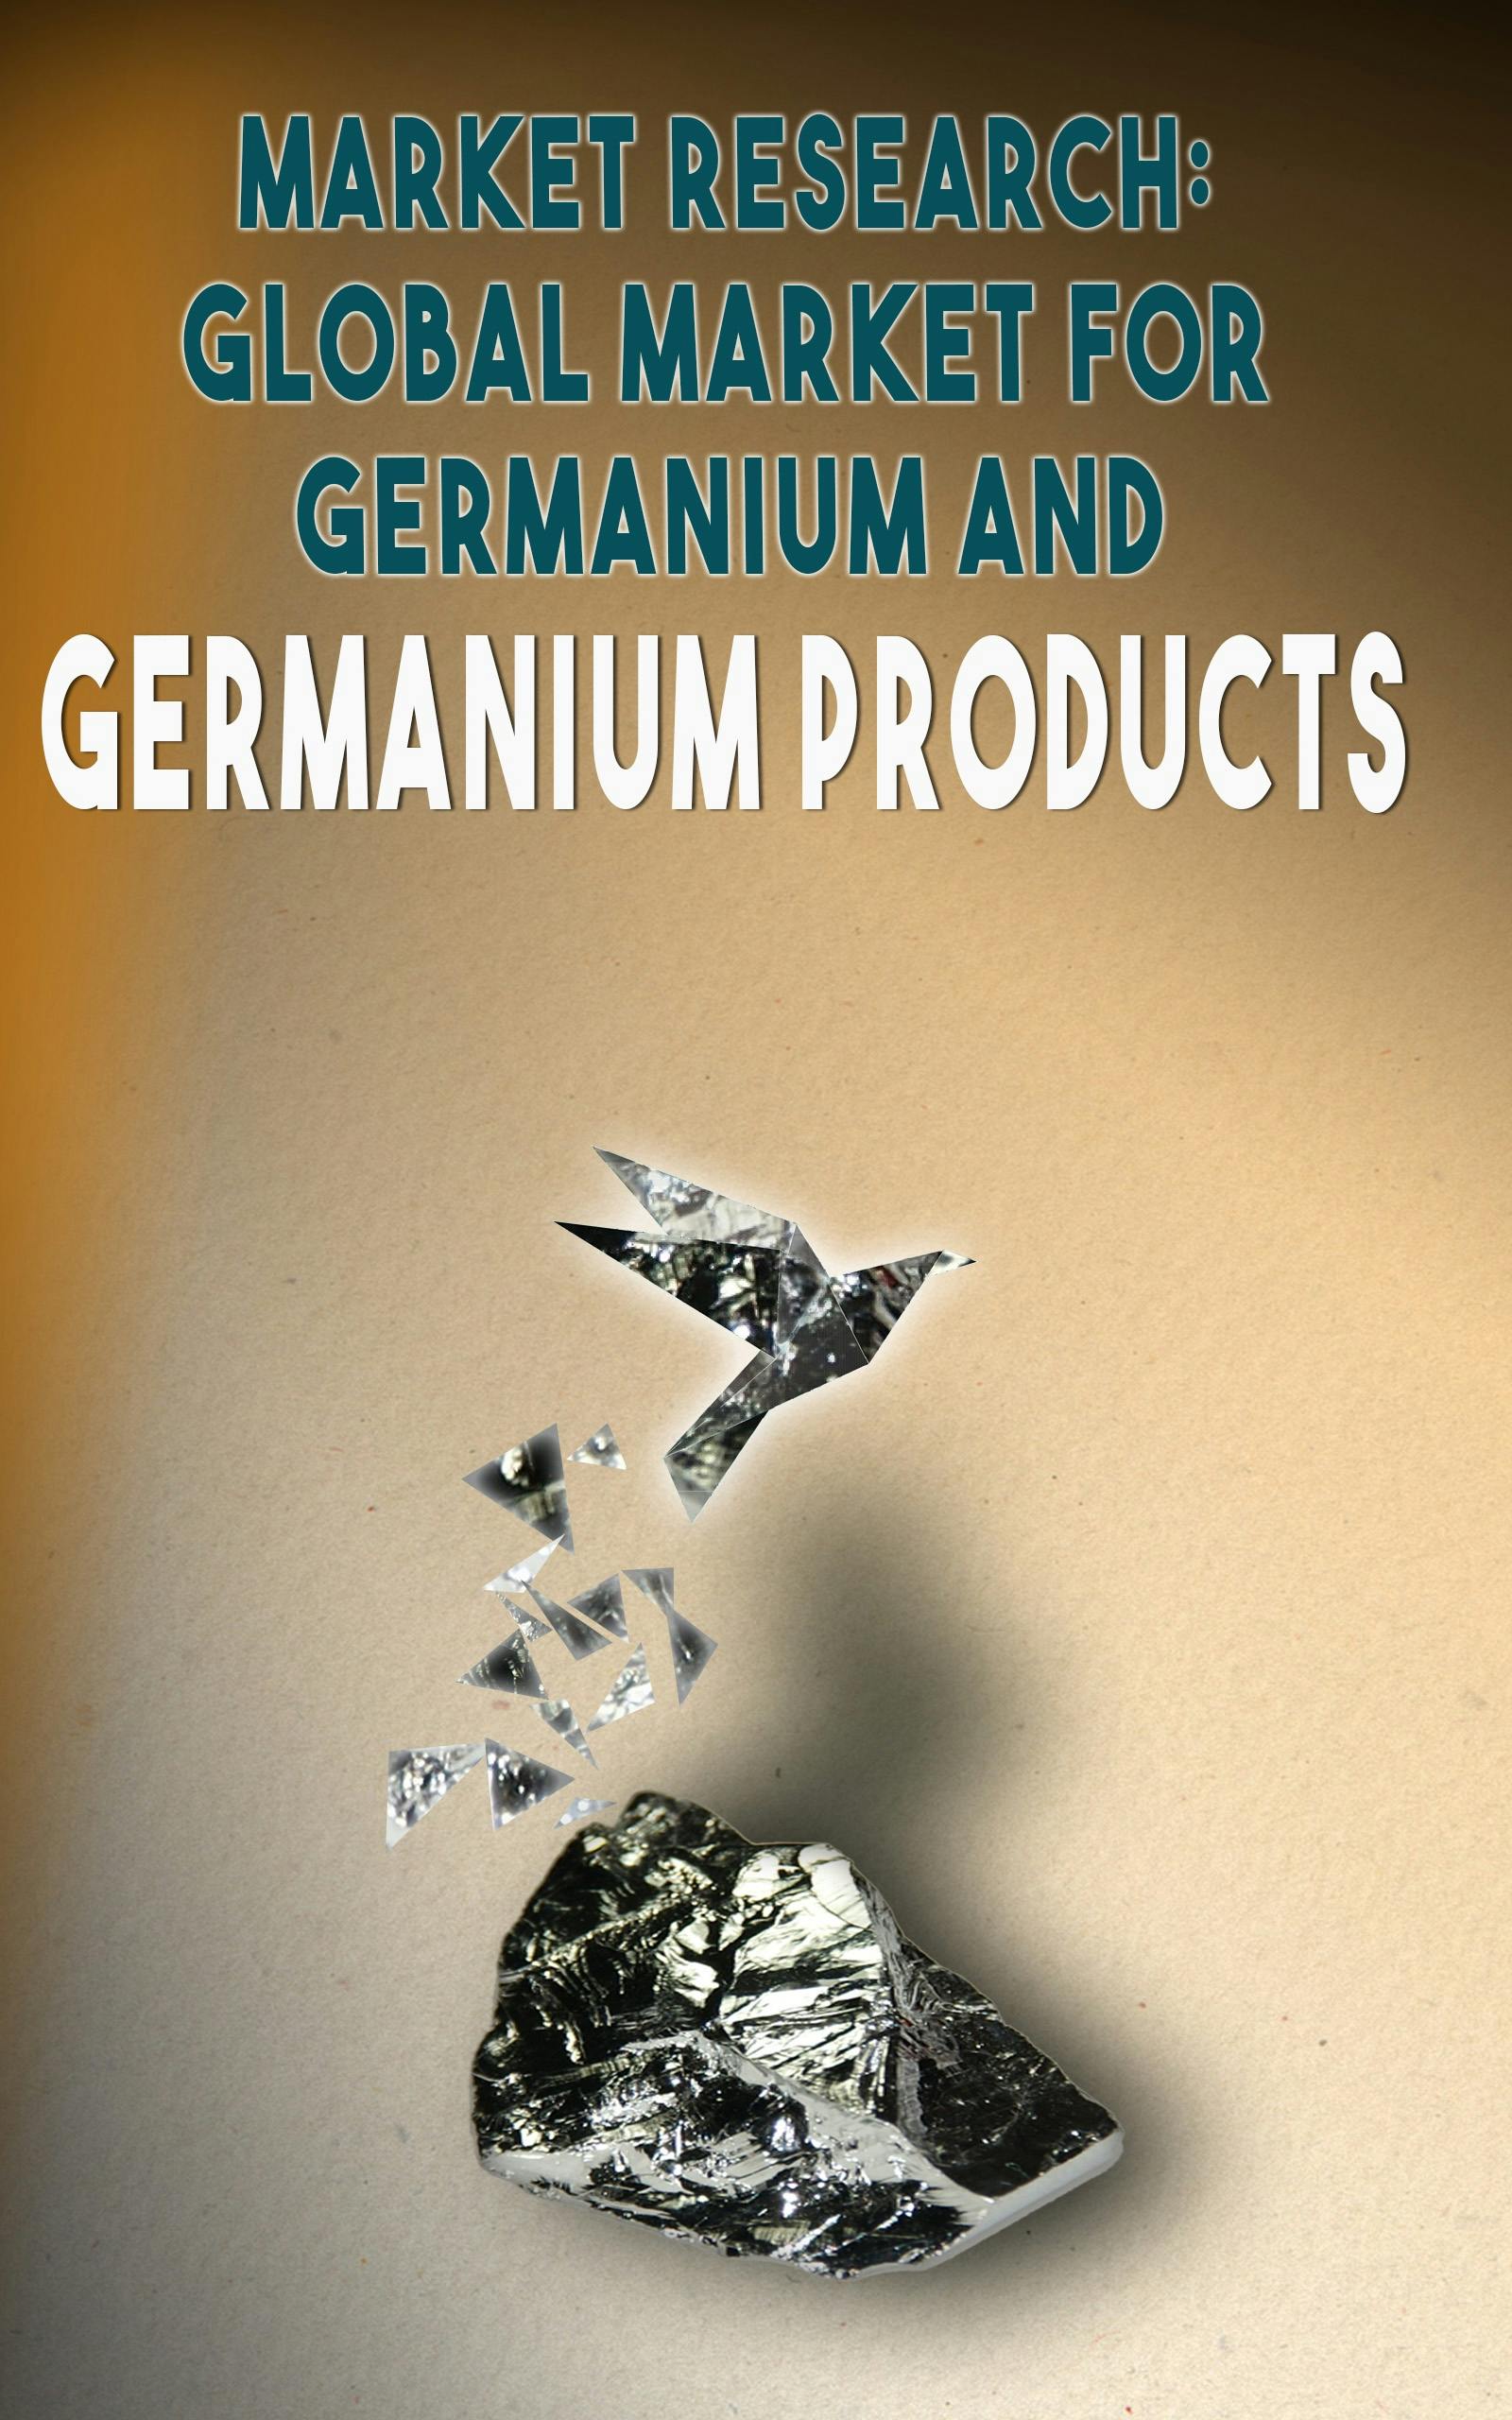 Market Research, Global Market for Germanium and Germanium Products - Andrei Besedin